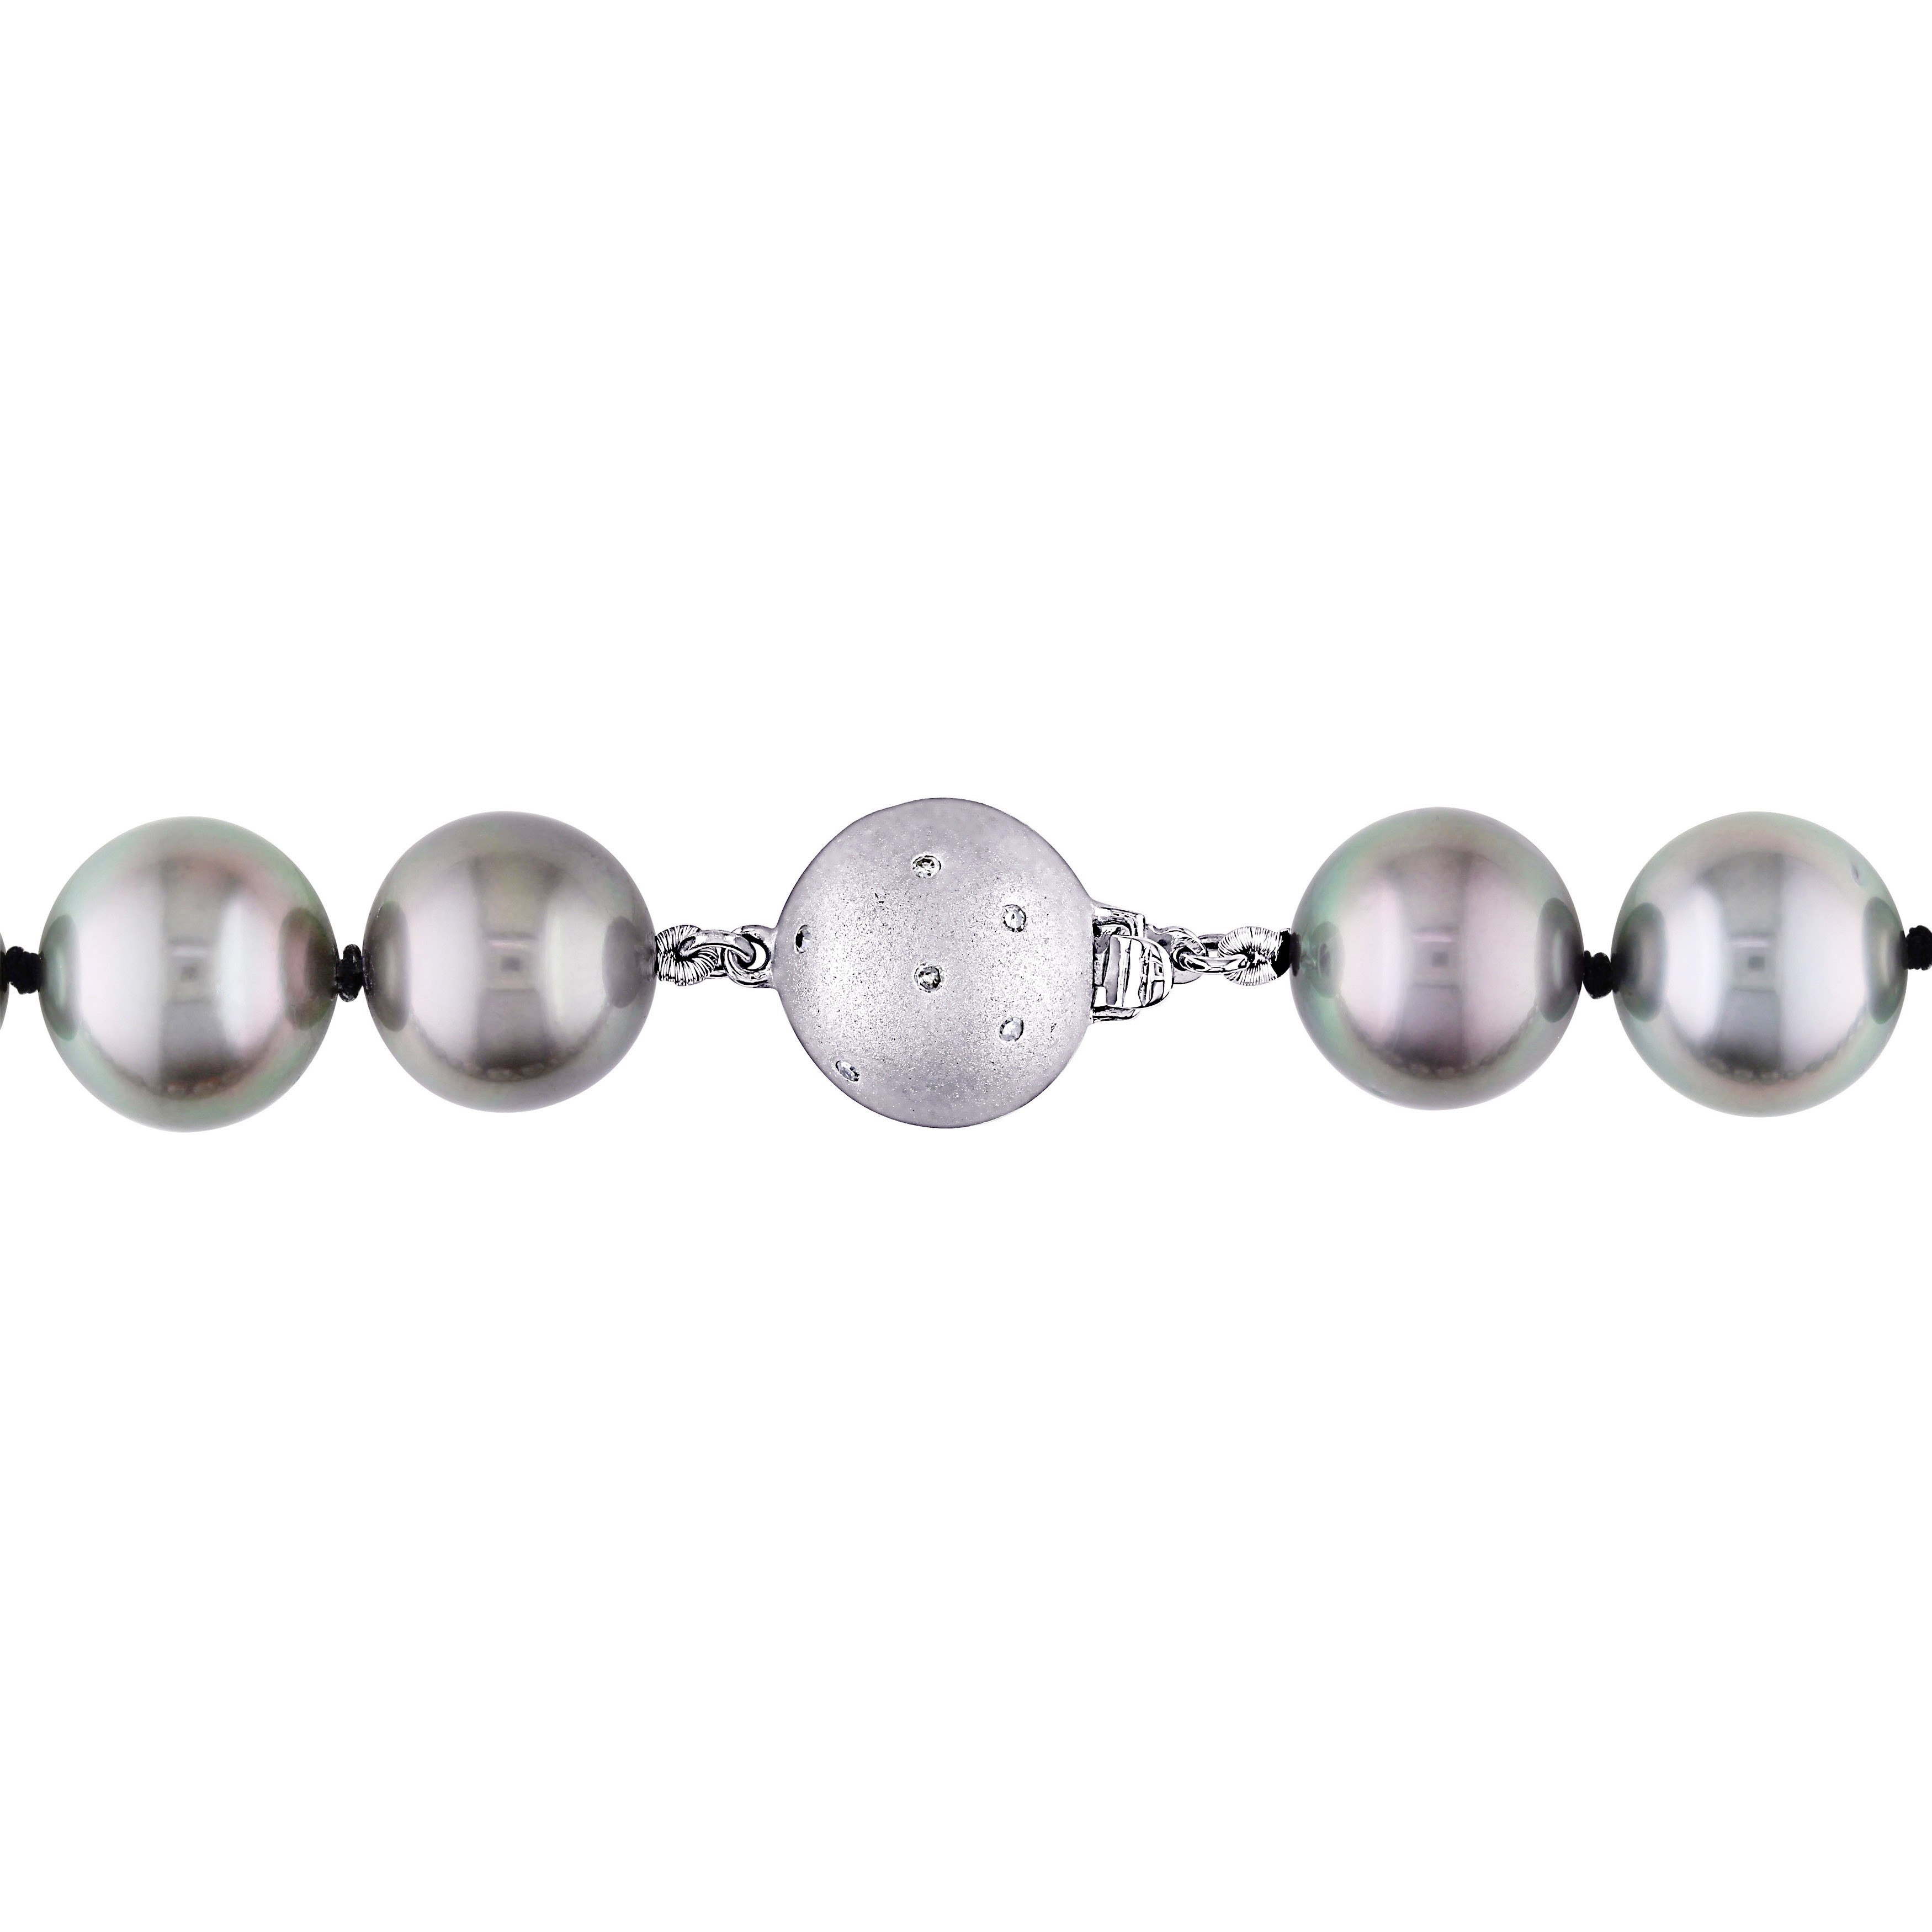 10-13 MM Graduated Black Tahitian Pearl Strand with 14k White Gold Ball Clasp - 18 in